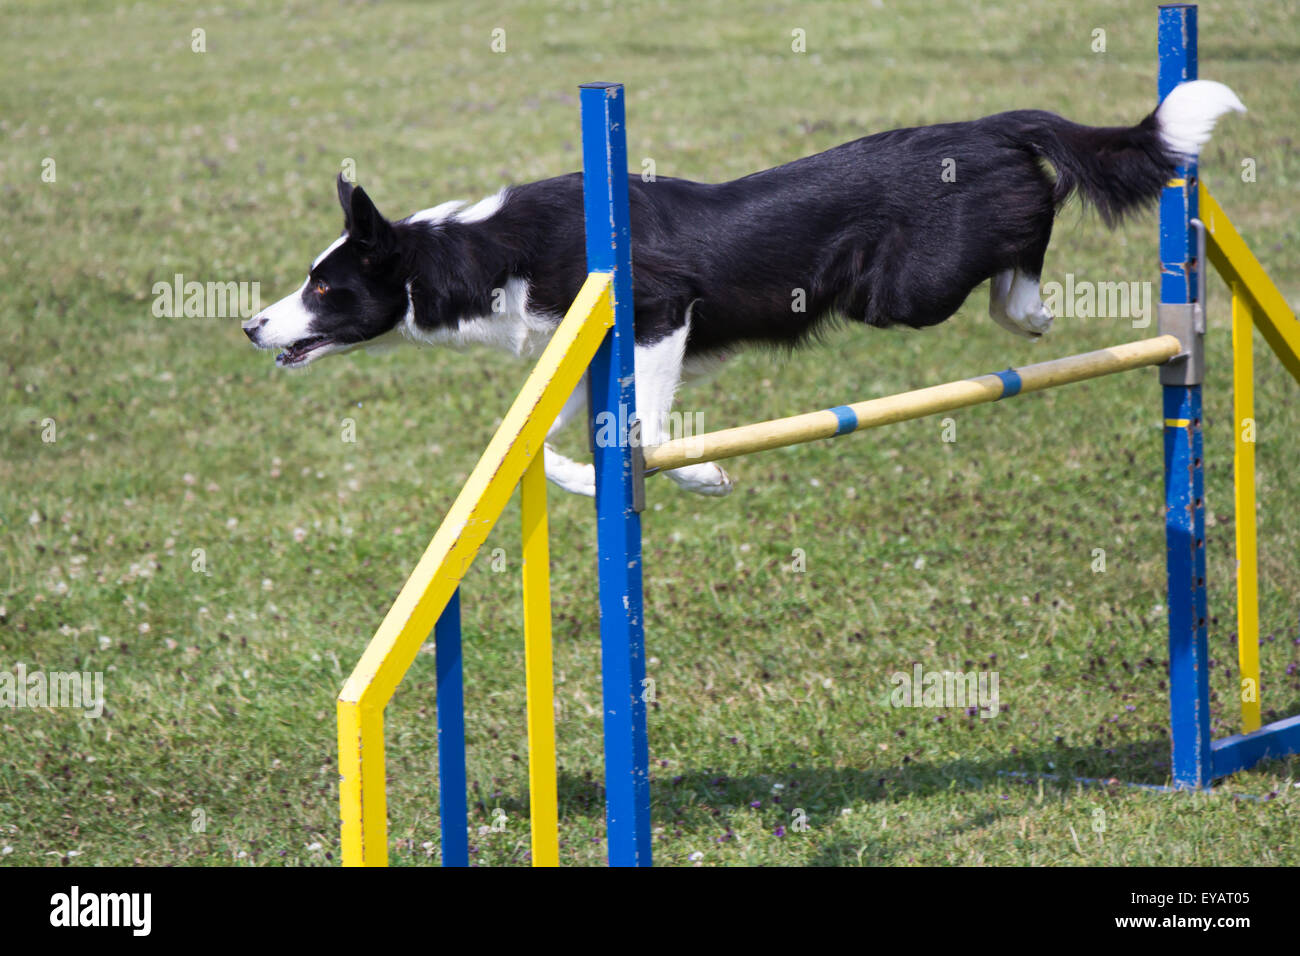 Dog Agility jumping over a hurdle during an agility competition Stock Photo